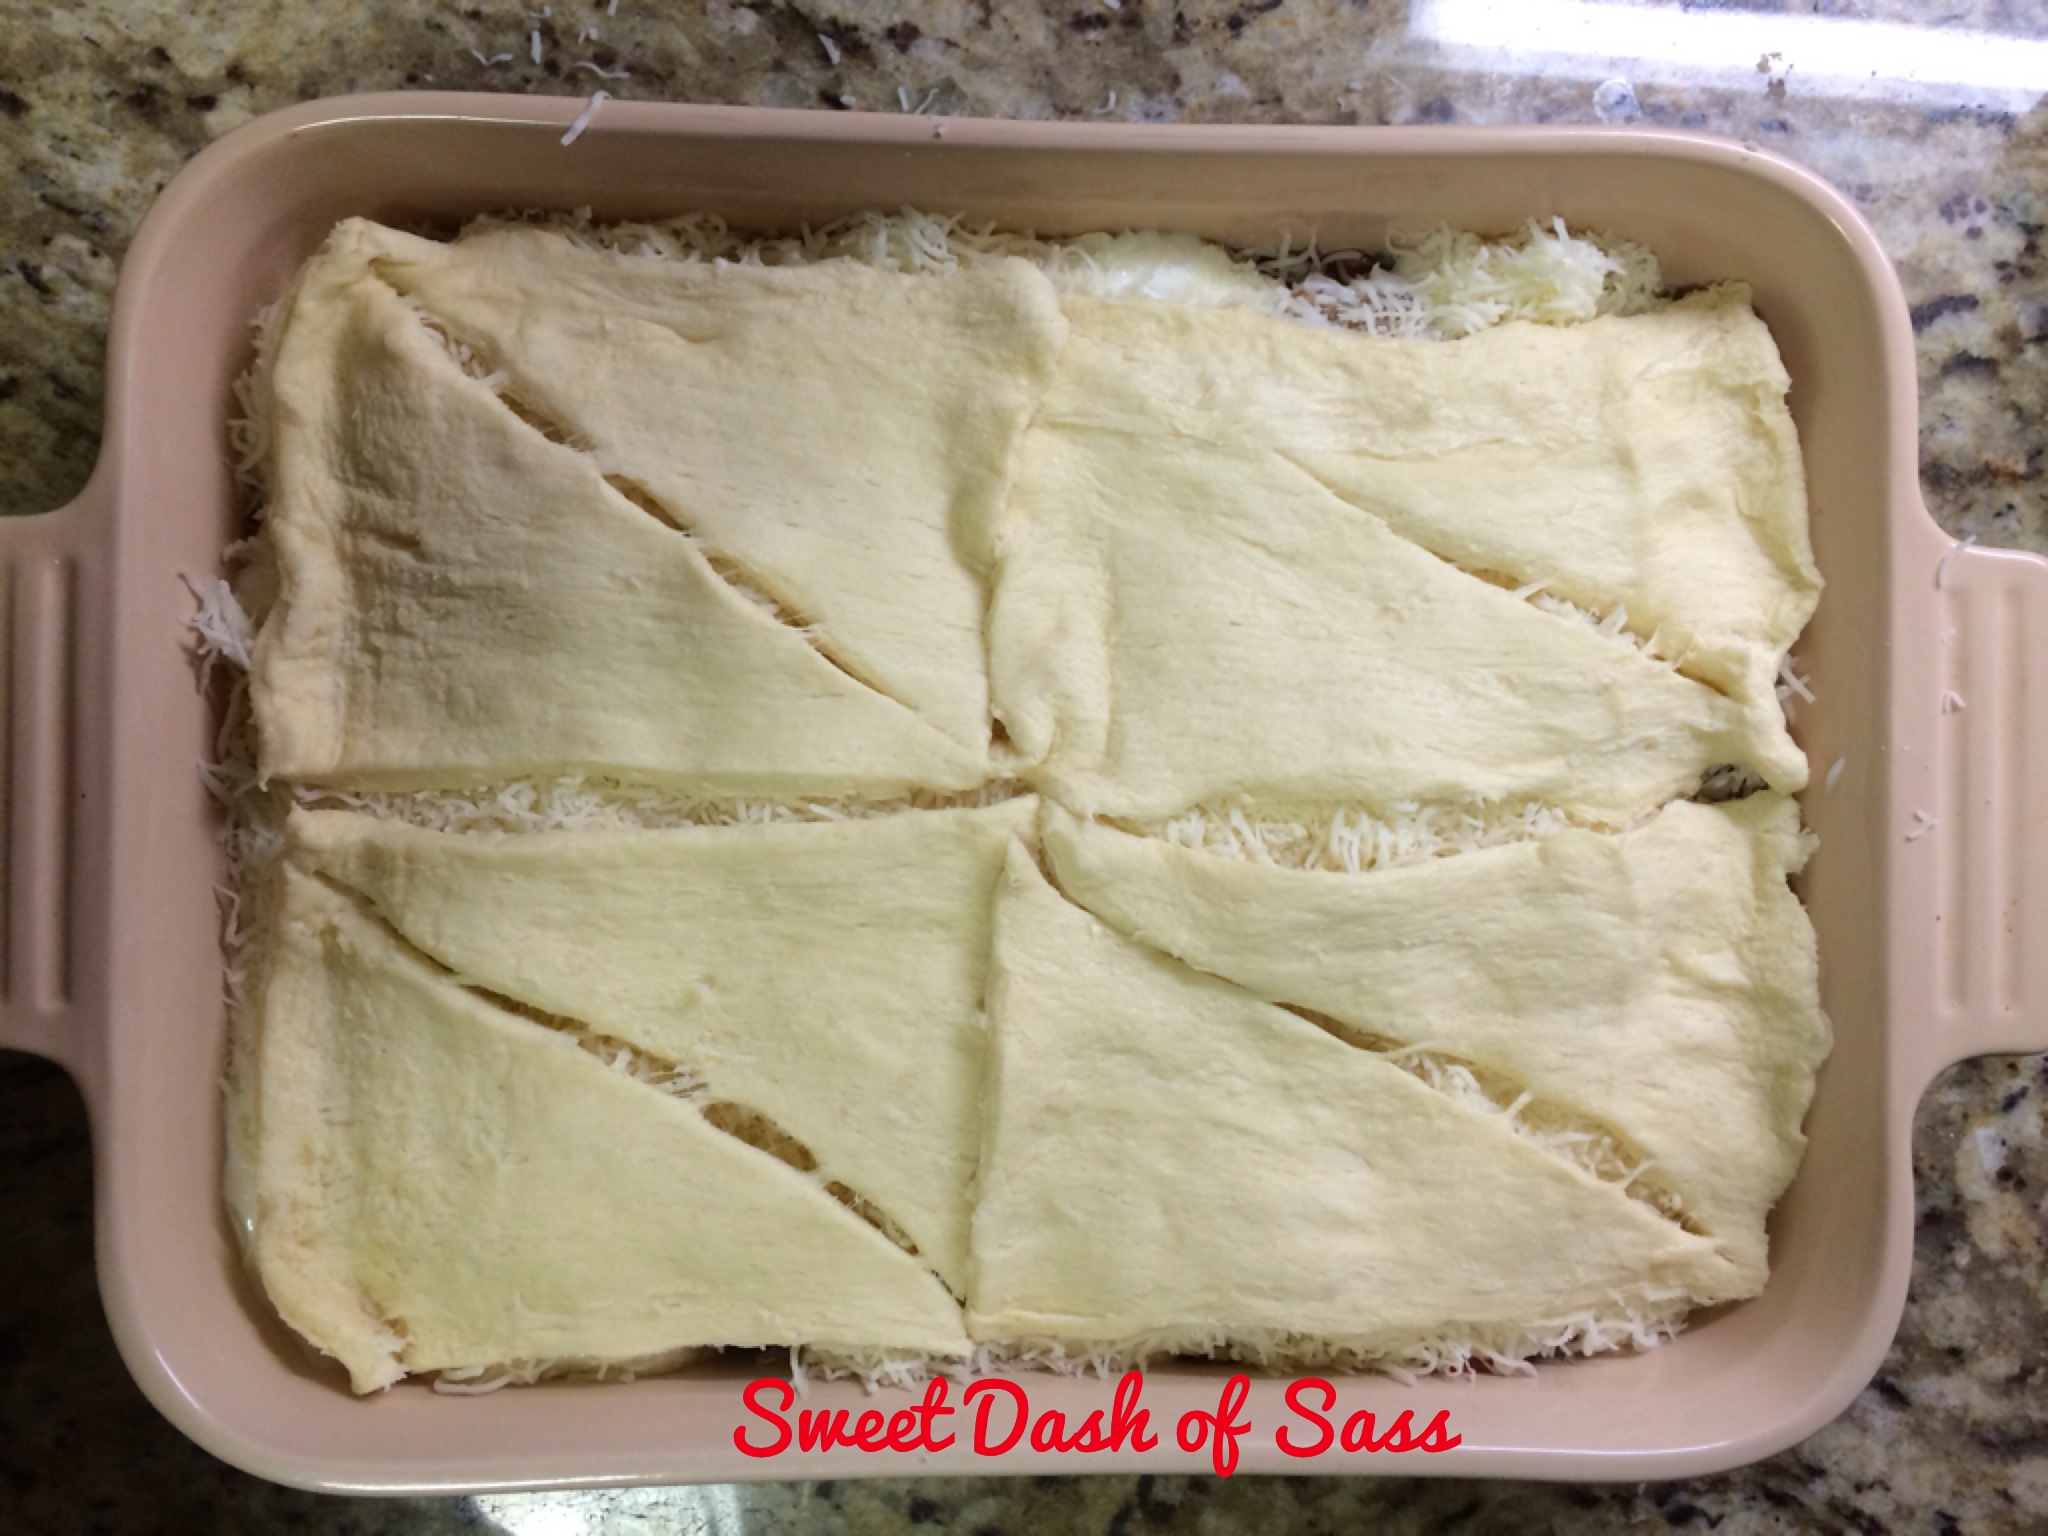 Upside Down Pizza Pie - www.SweetDashofSass.com  Check out and 'LIKE' Sweet Dash of Sass for this recipe and many more!